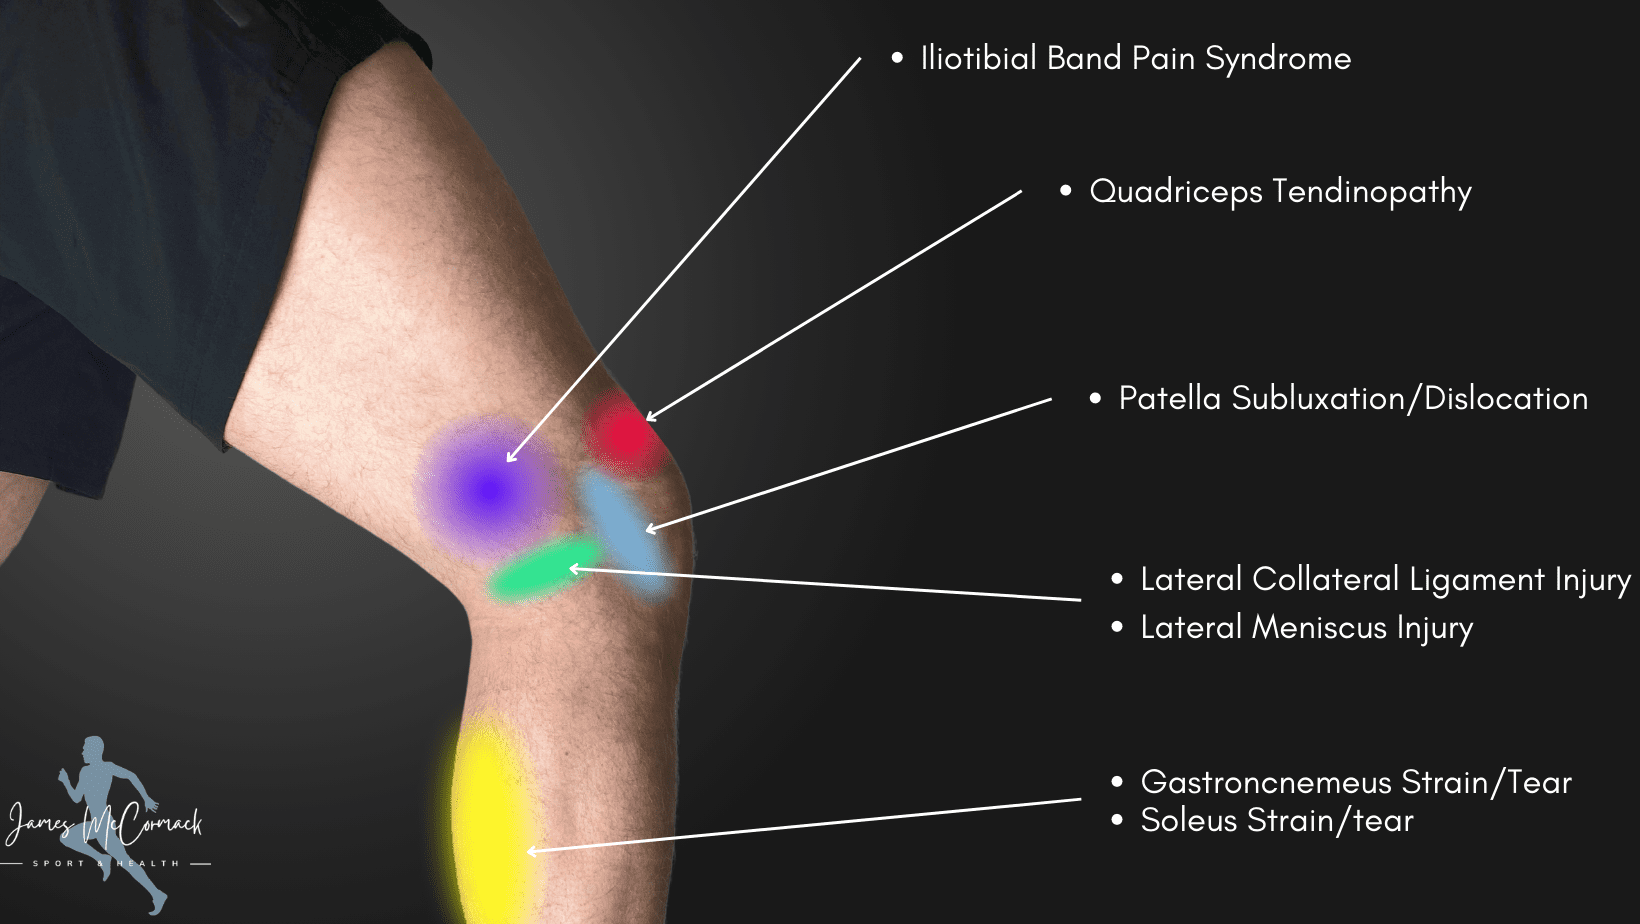 Knee Pain Location Chart Learn The Pain Location Of Knee Injuries